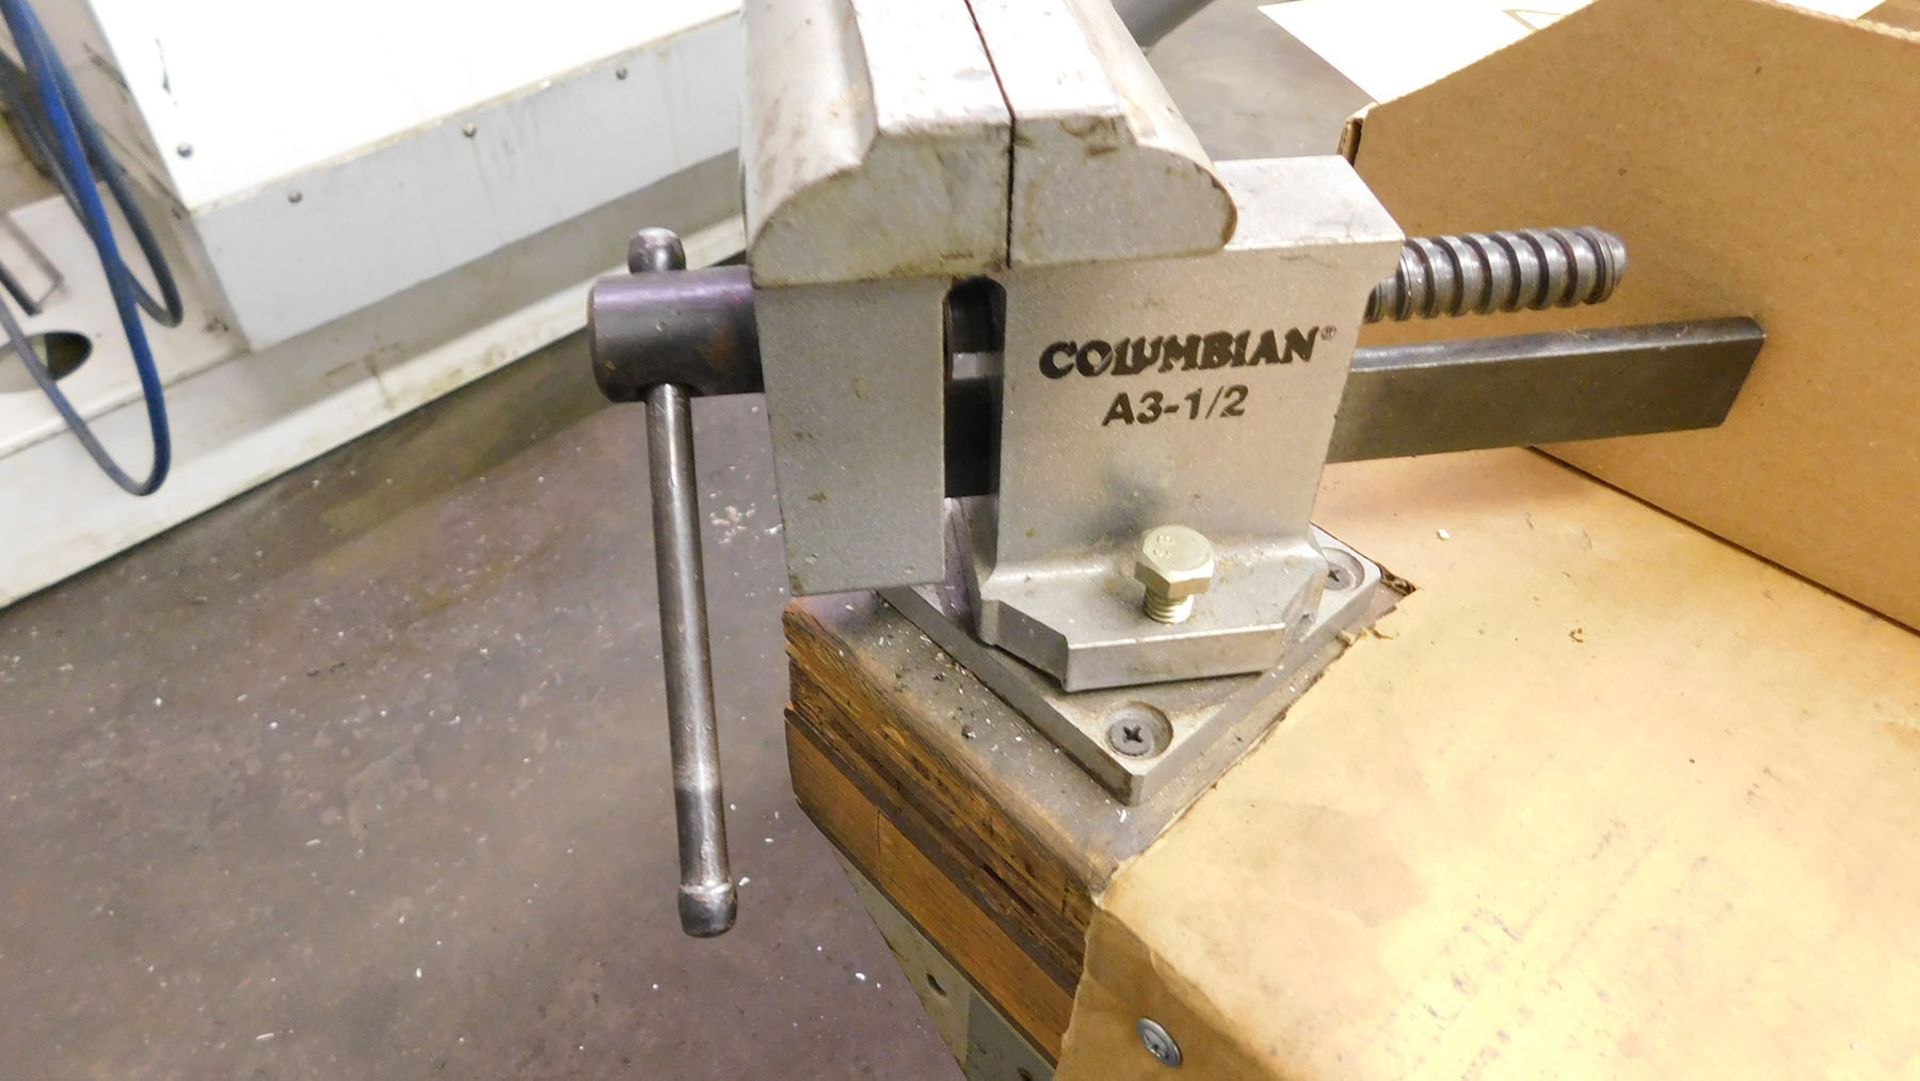 6' X 3' STEEL WORK TABLE WITH COLUMBIAN A 3 1/2 VISE - Image 2 of 3